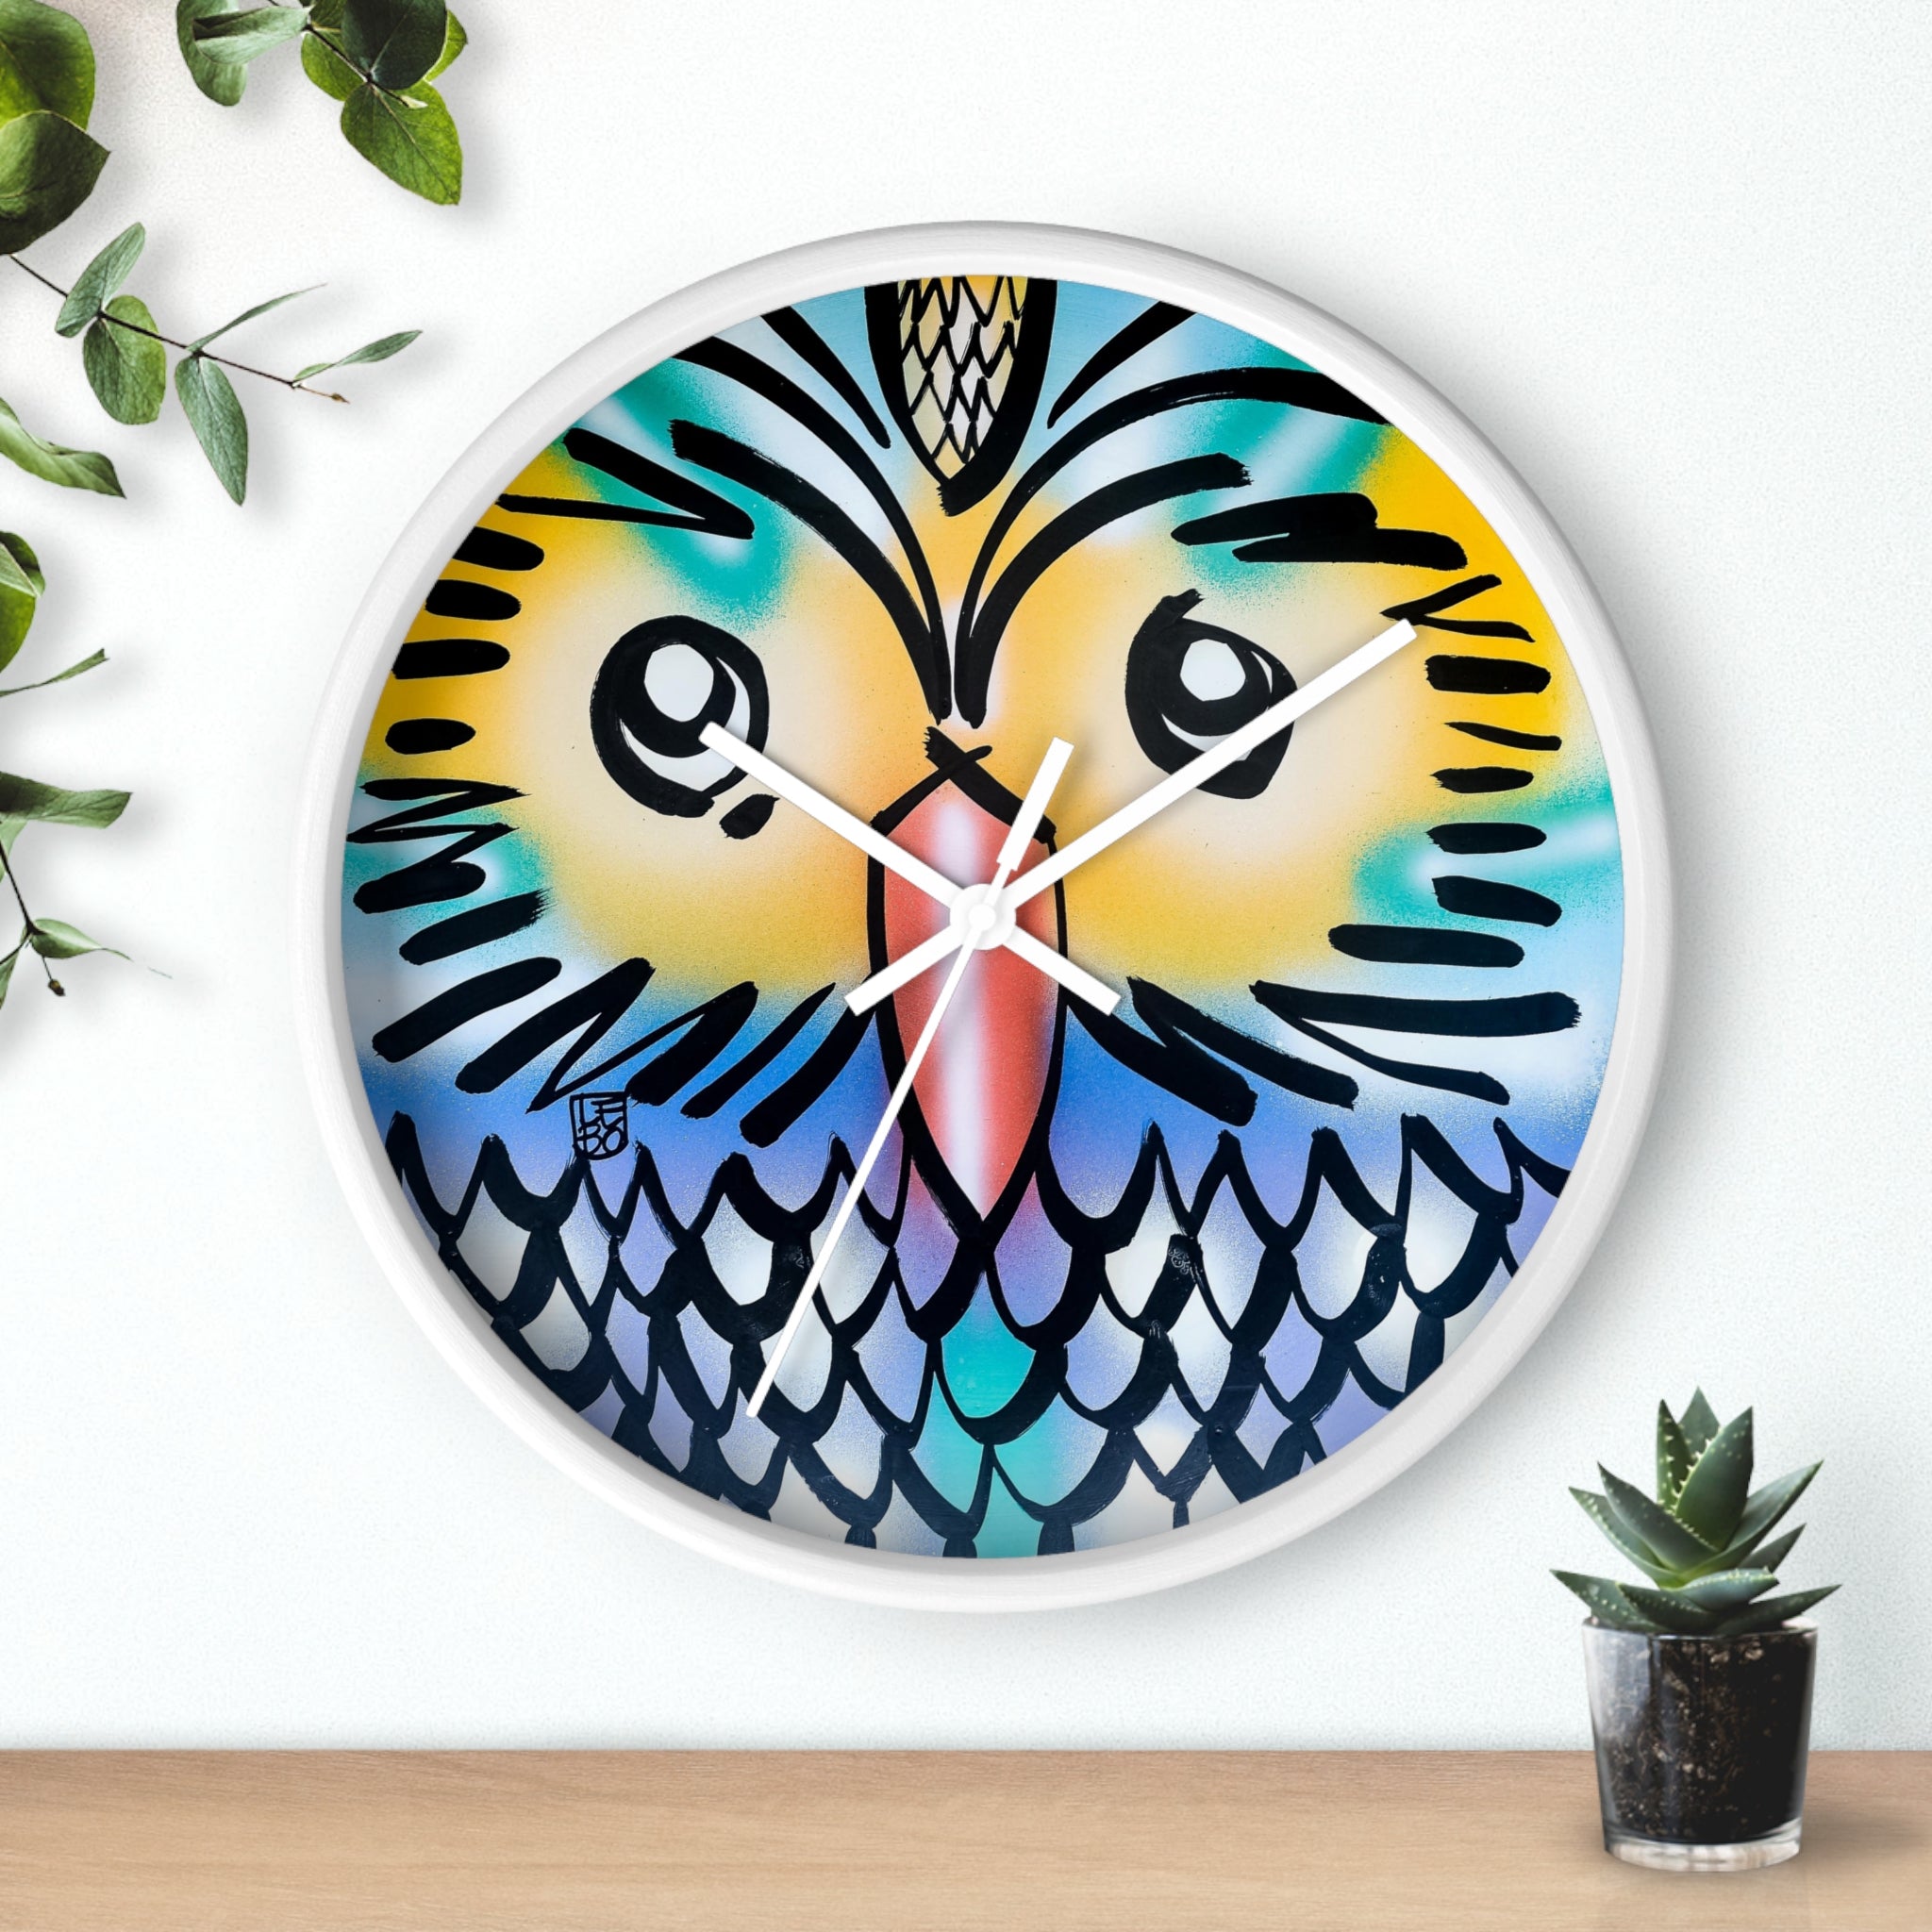 Keep Your Eyes on the Stars – Lebo Wall clock